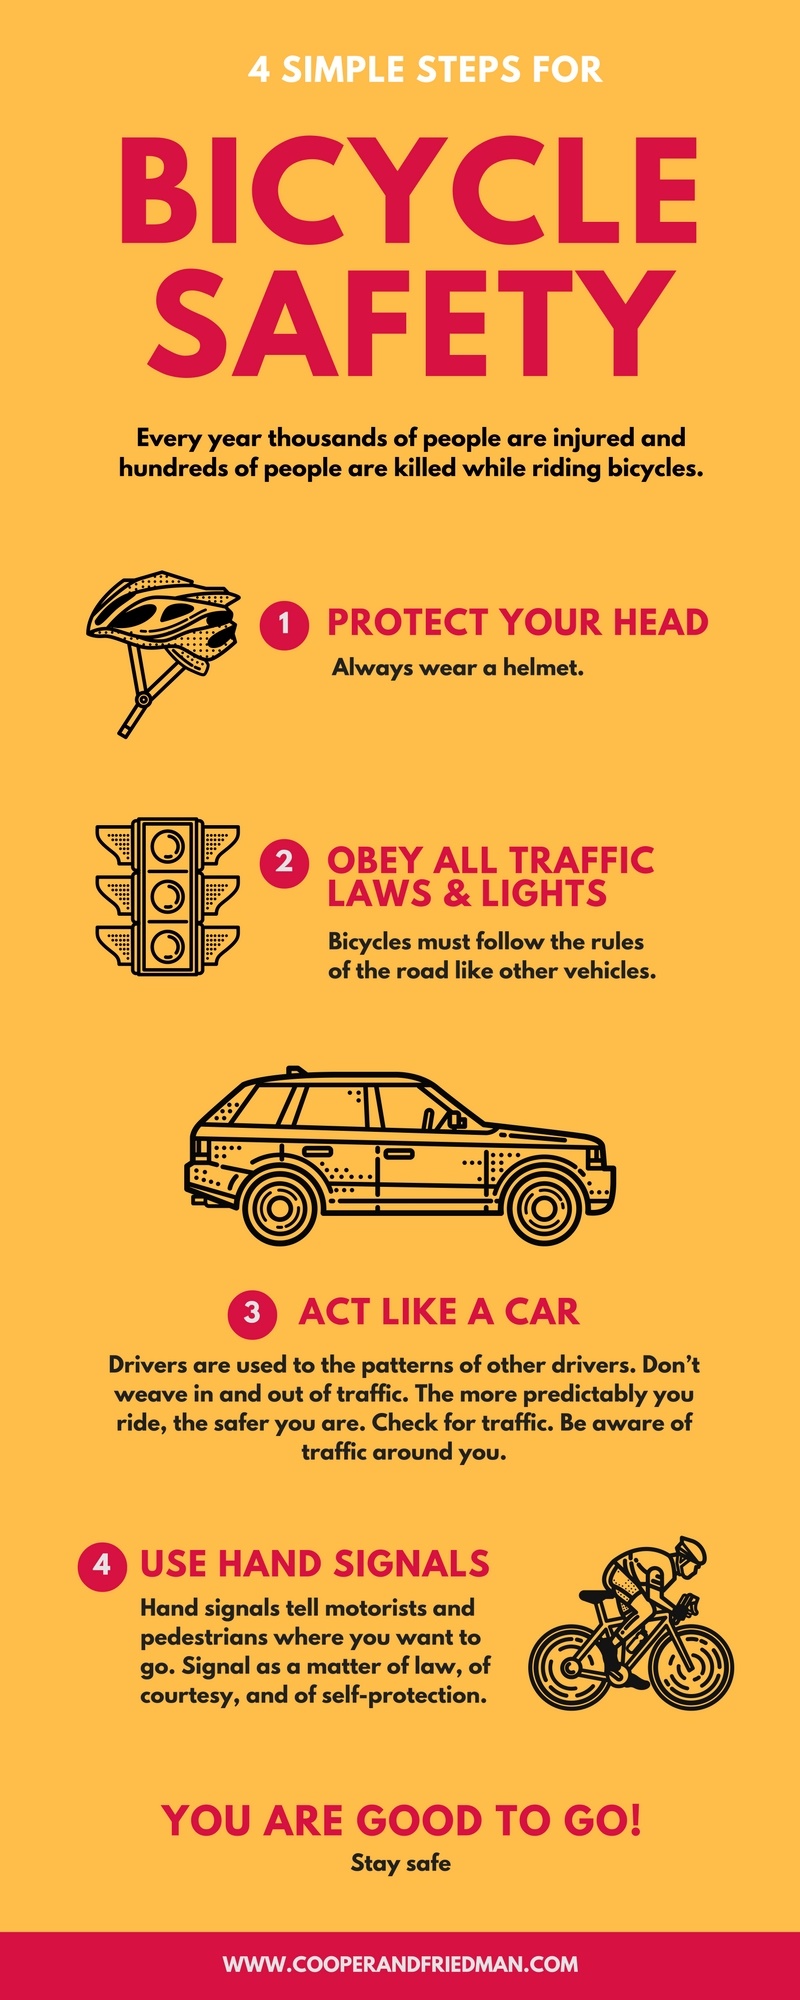 As personal injury attorneys, we understand how important it is to wear ... - Bike Safety Infographic